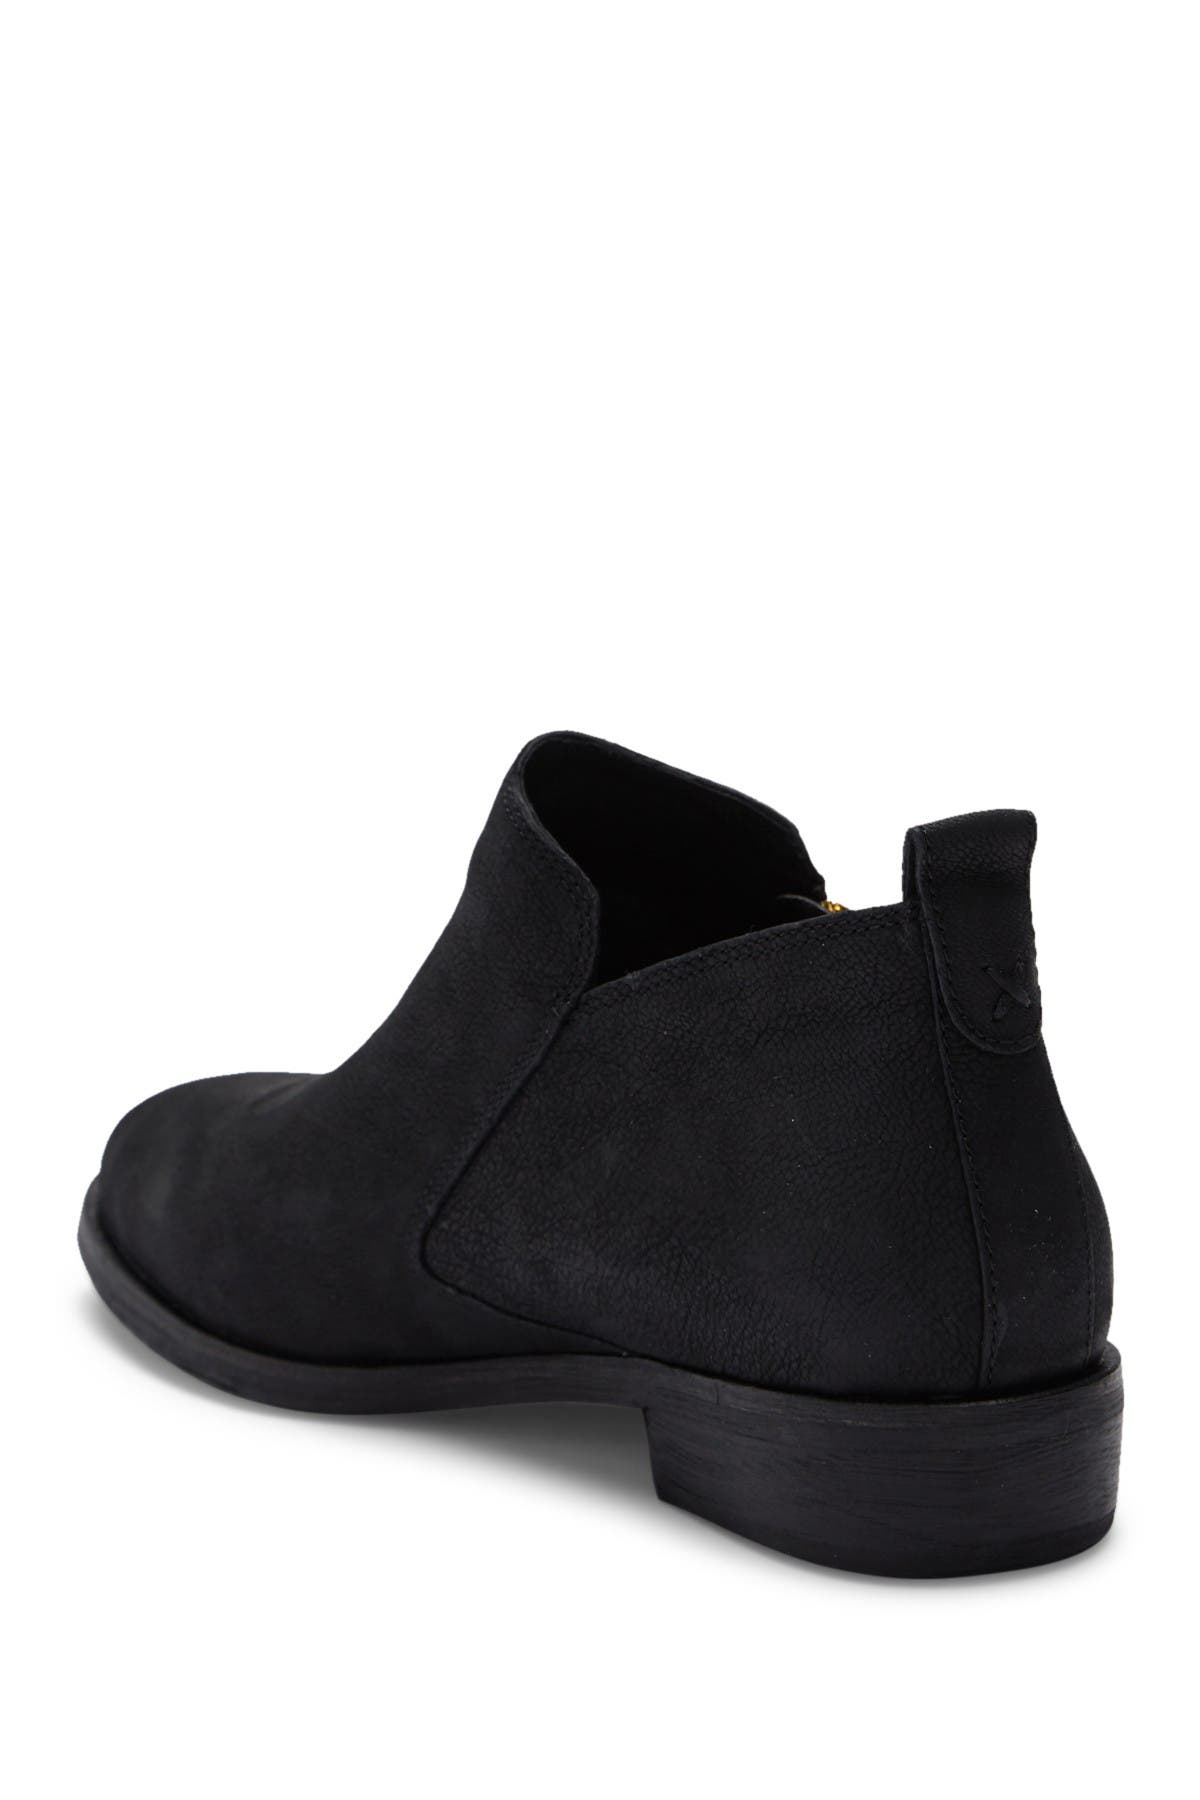 ugg glee leather ankle bootie